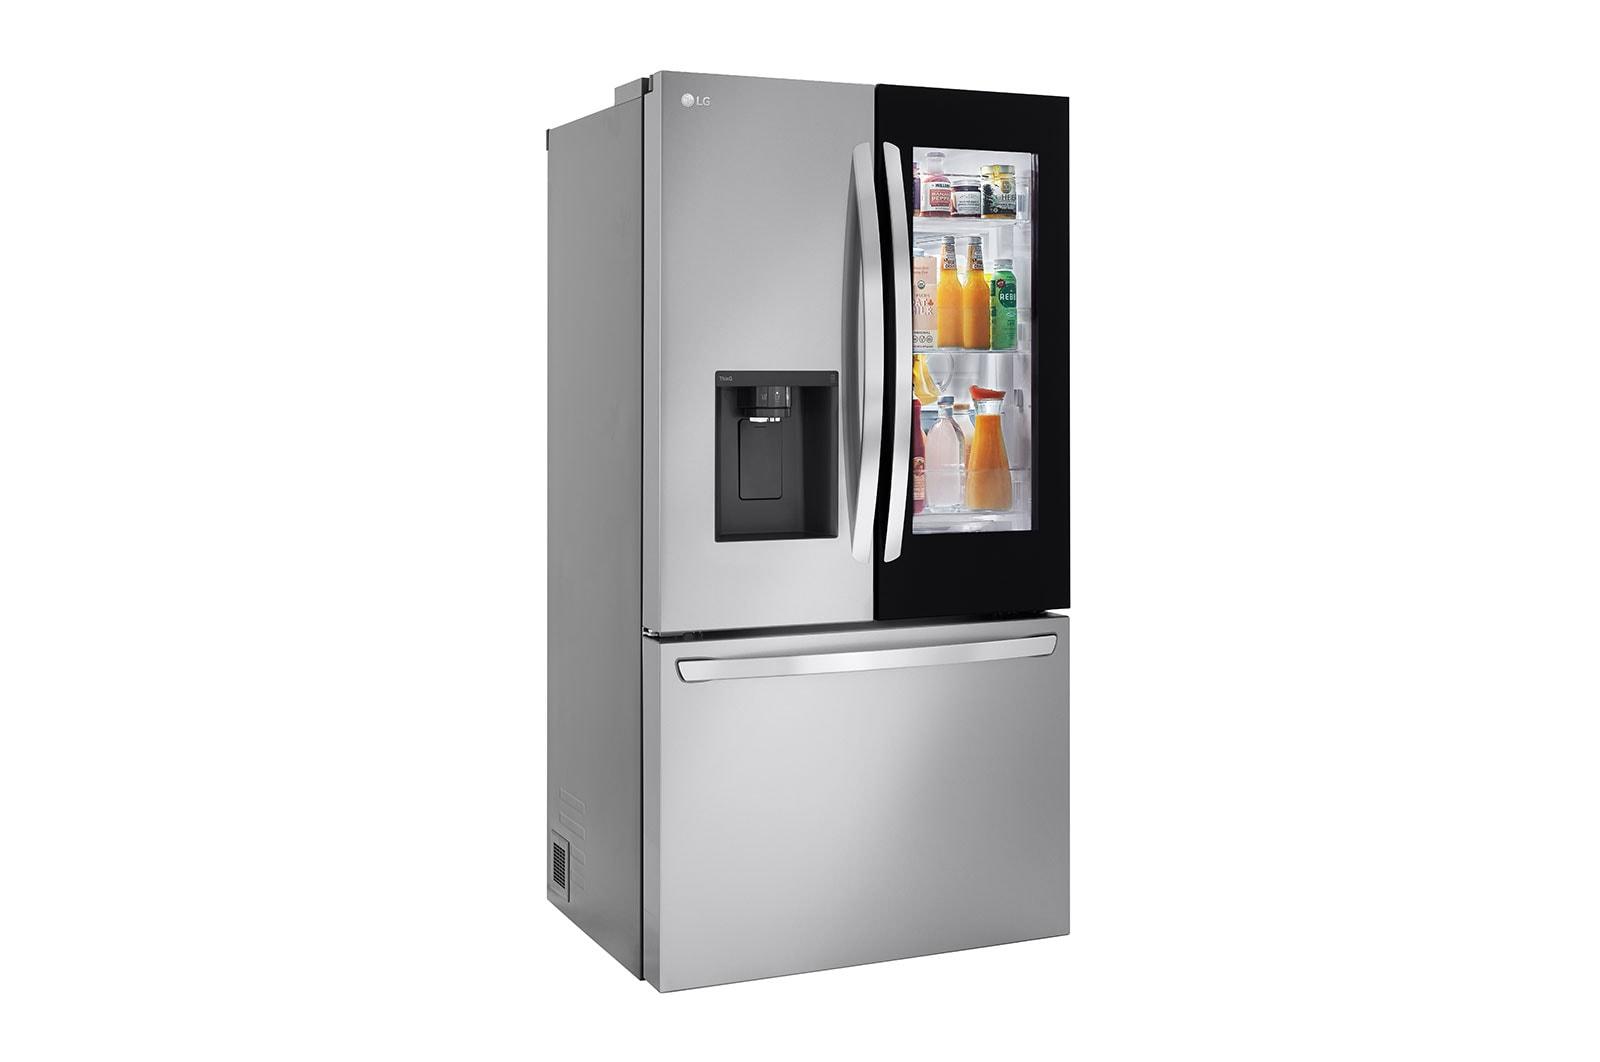 LG Expands Industry-First 'Craft Ice' Feature To More Refrigerator